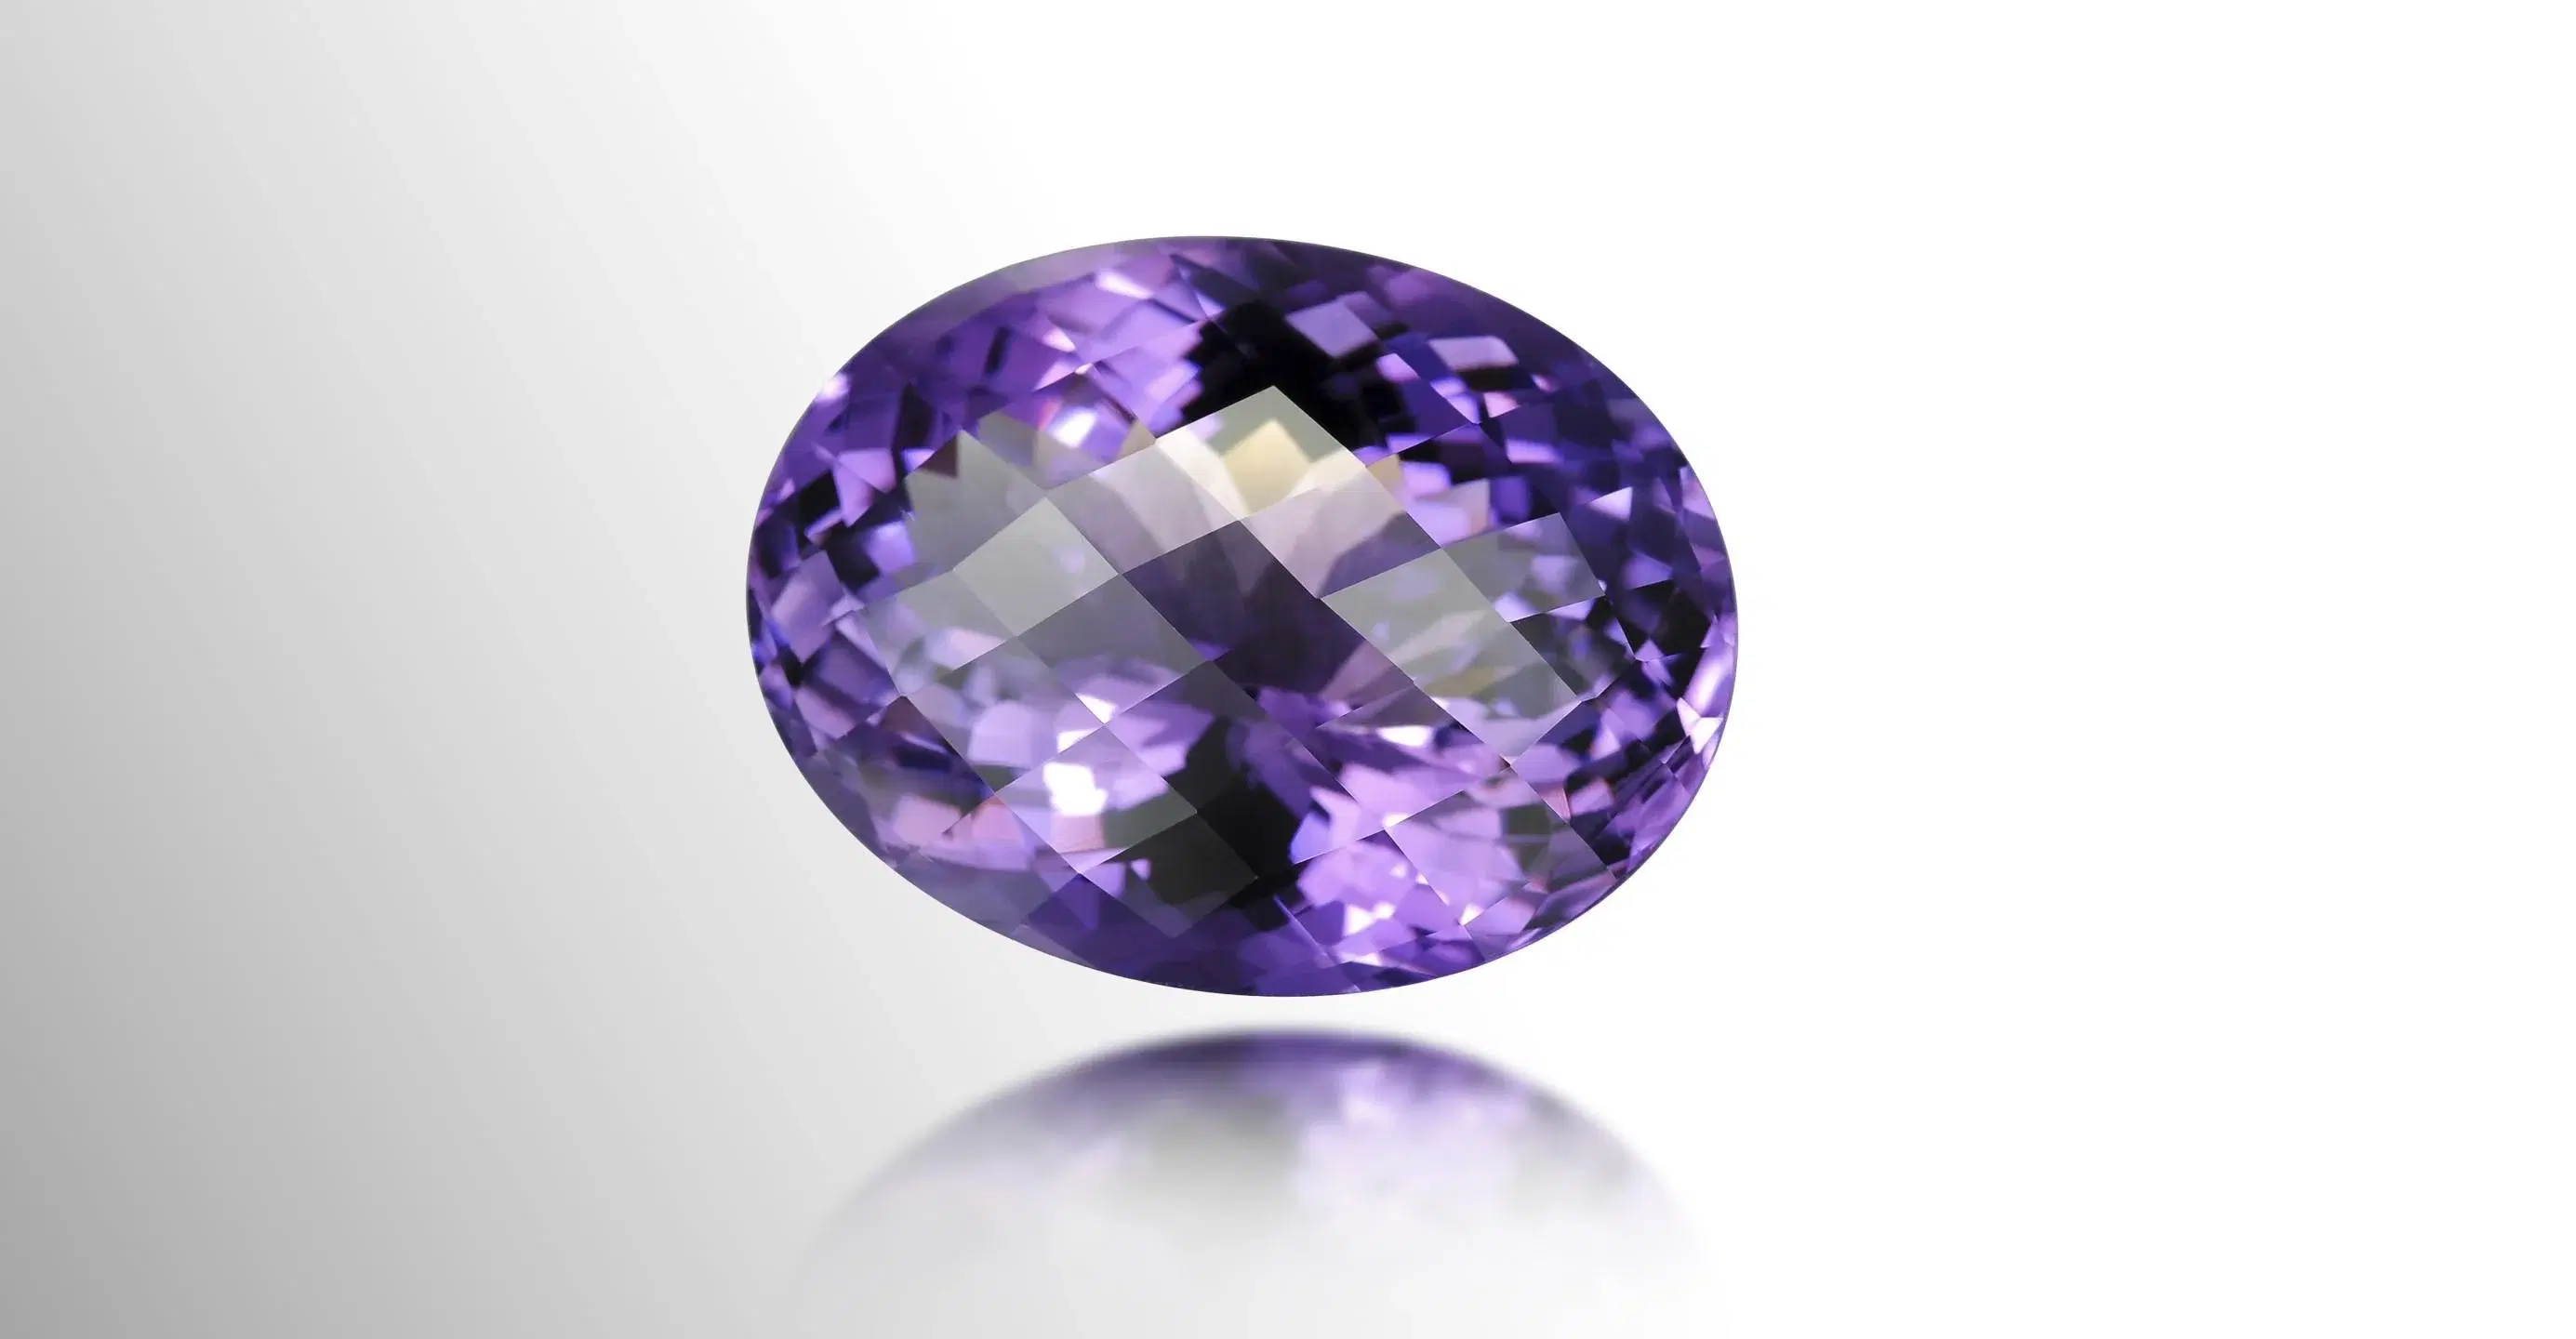 February Birthstone: the Magnificent Amethyst